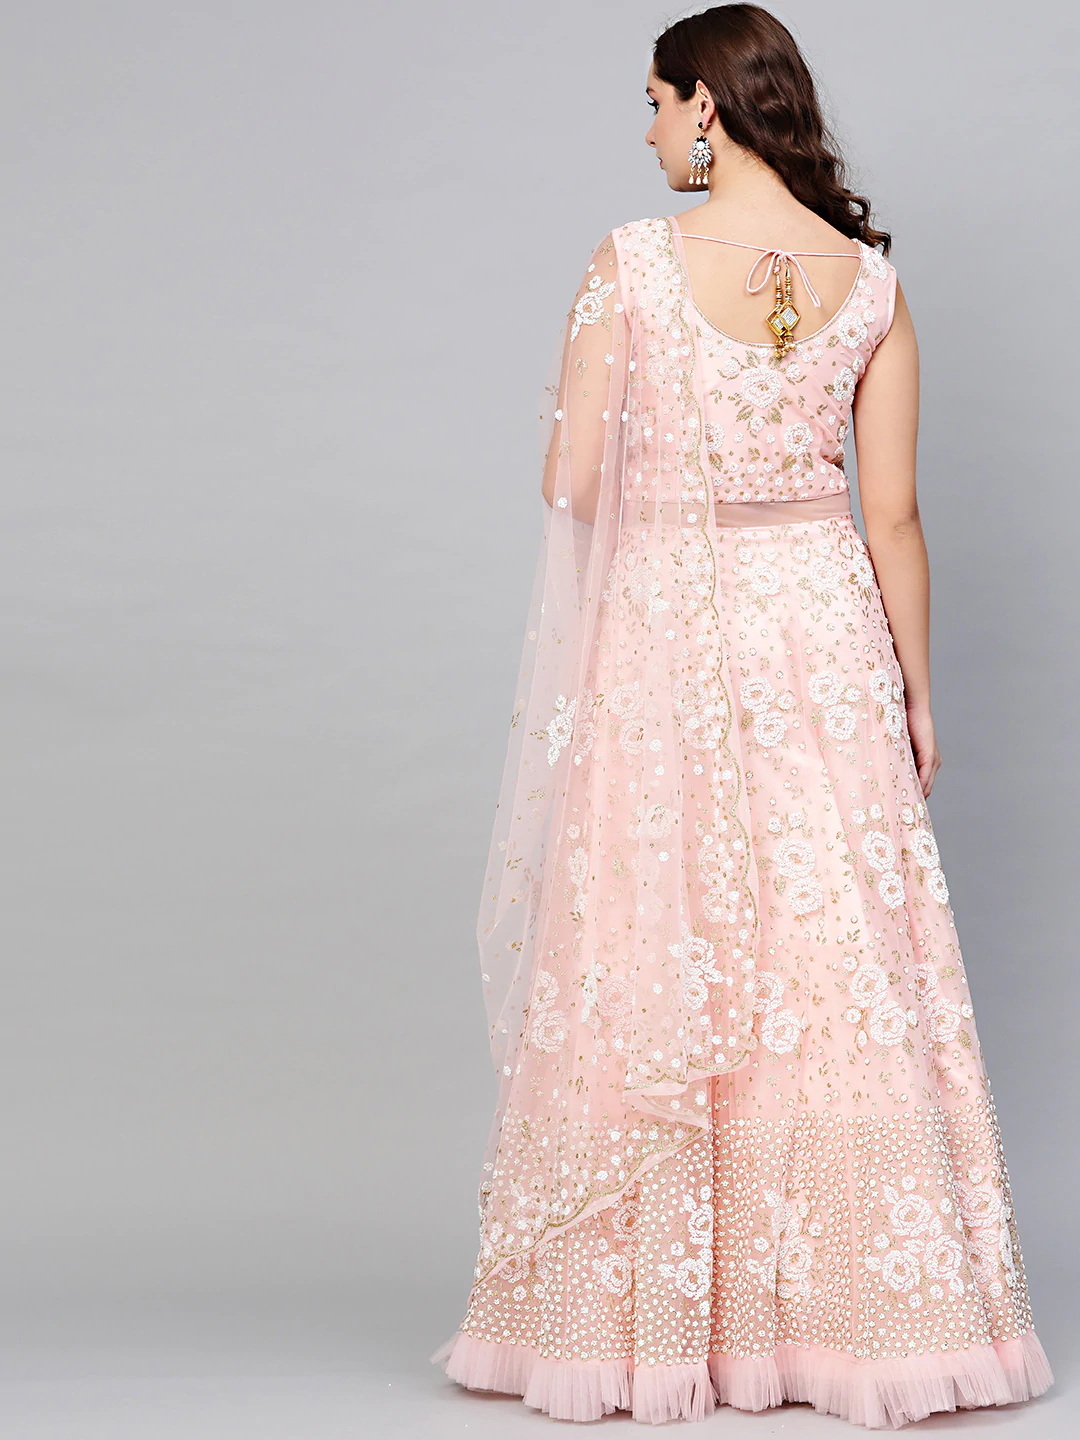 PInk Cocktail Gown with Pearl Glitter embellishements, Ruffled hemline and cutwork dupatta